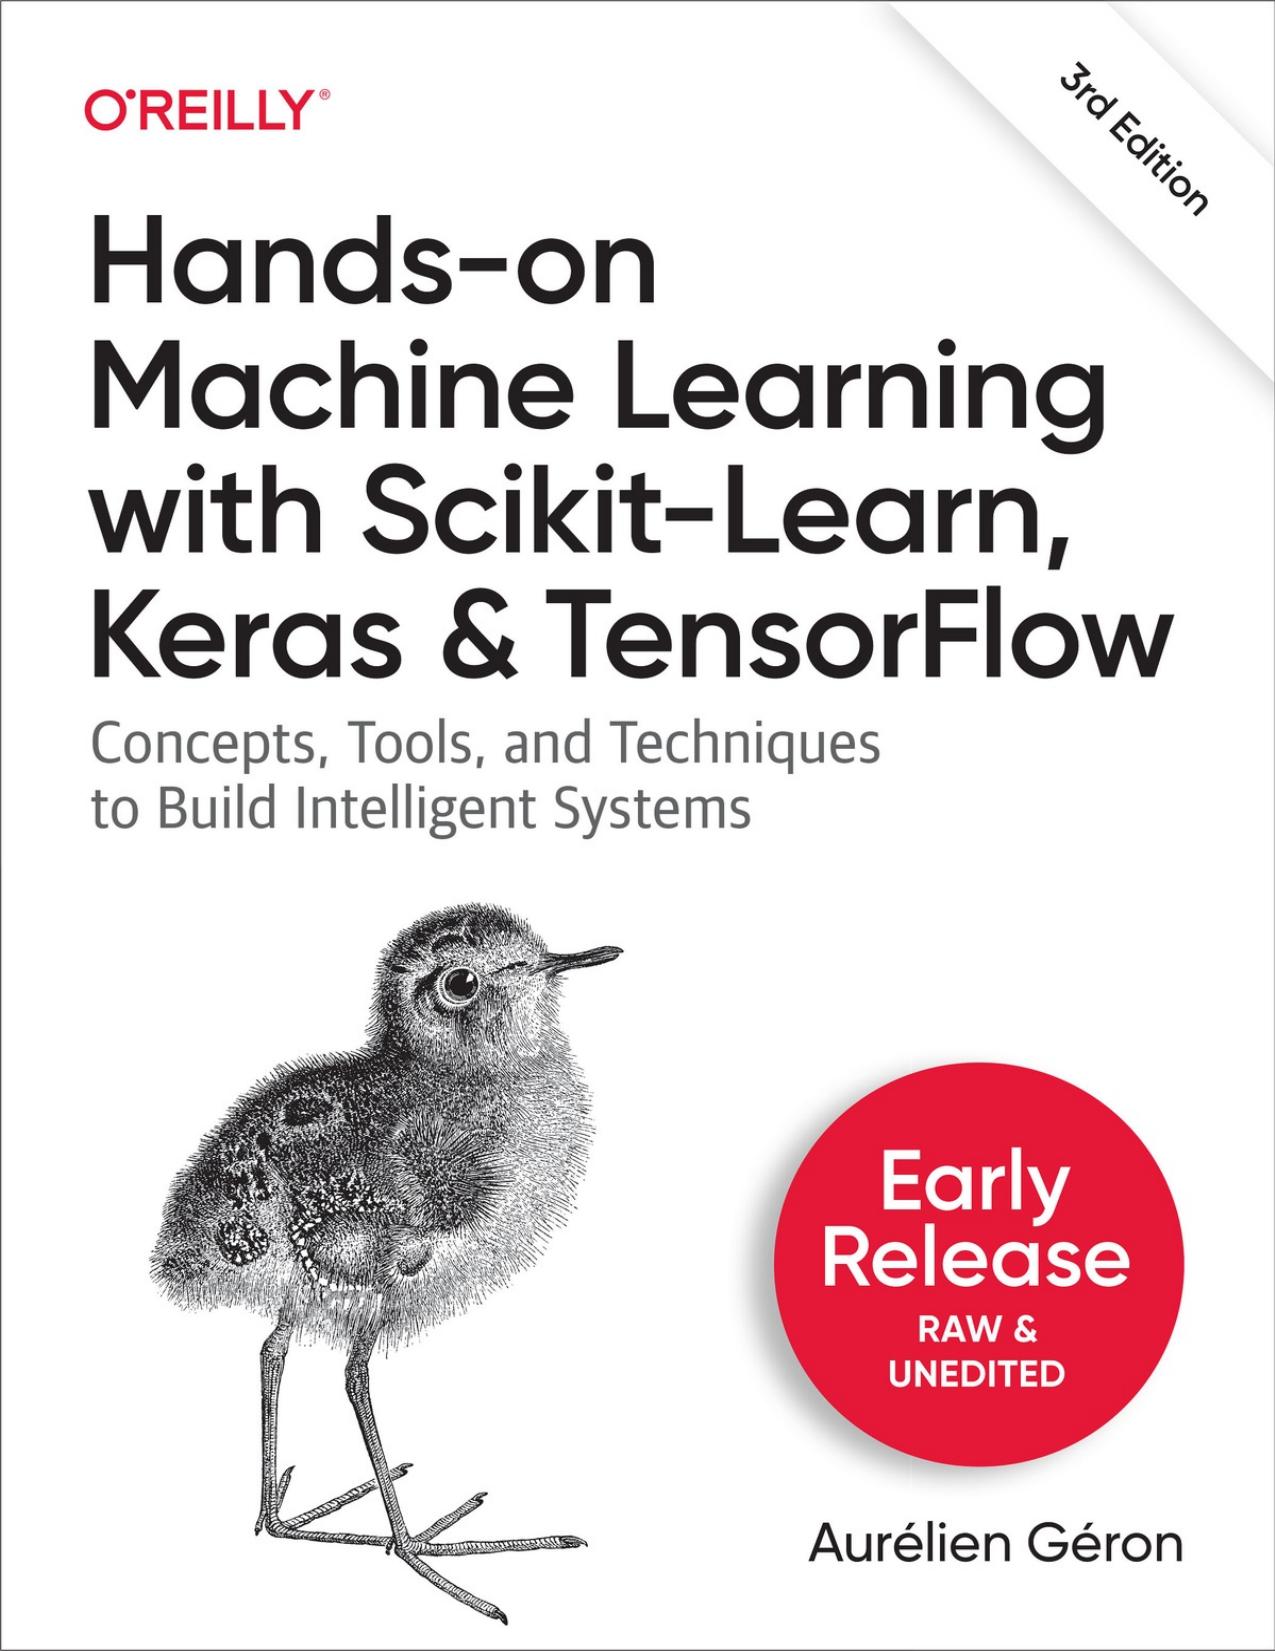 Hands-On Machine Learning with Scikit-Learn, Keras, and TensorFlow, 3rd Edition